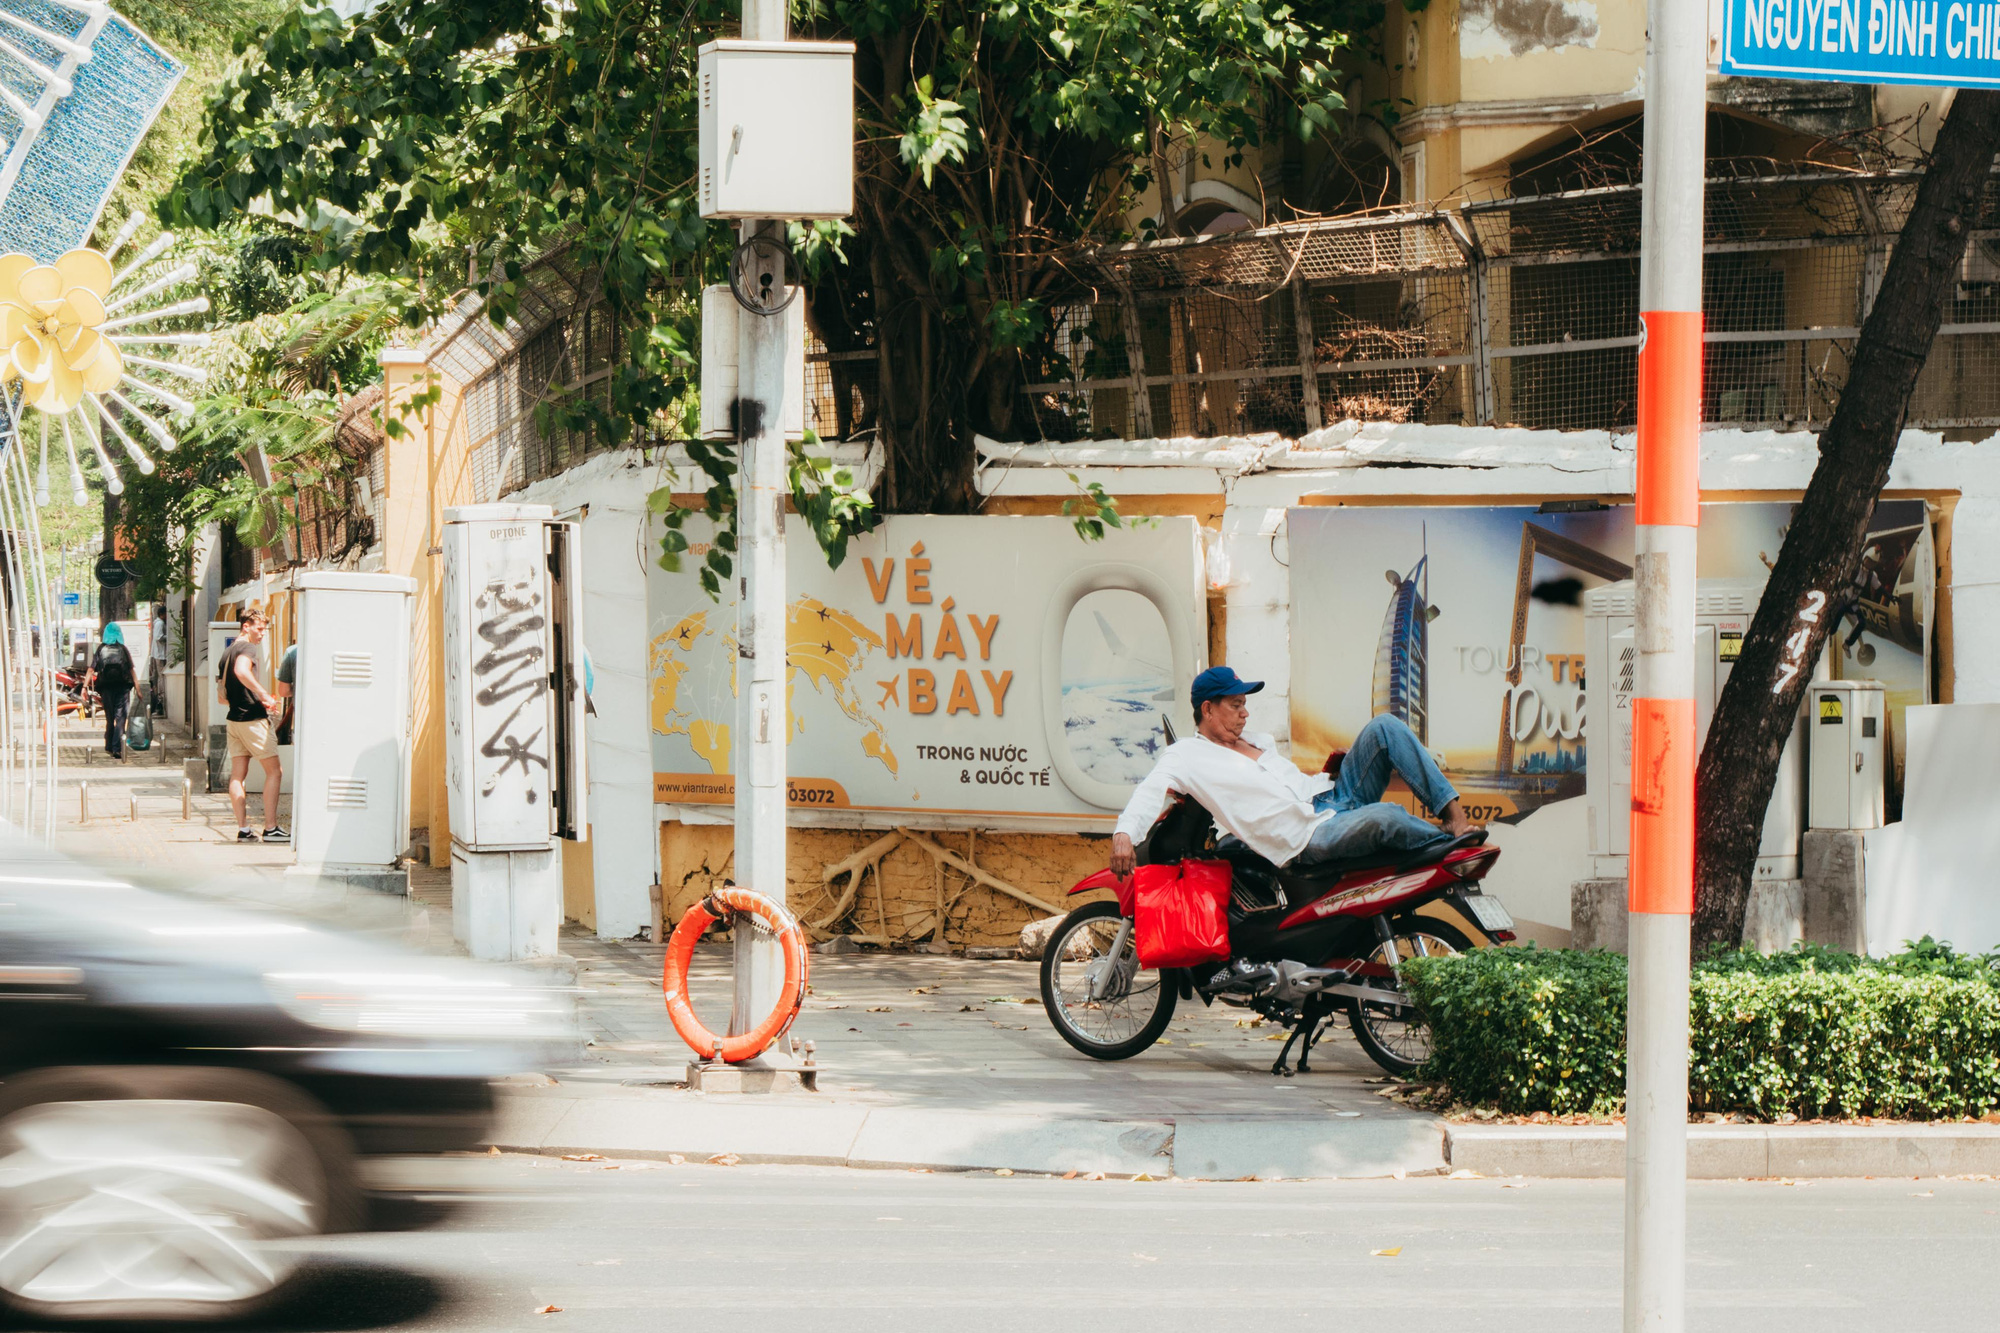 A ride-hailing driver takes a respite under a tree shade in Ho Chi Minh City. Photo: Thanh Hiep / Tuoi Tre